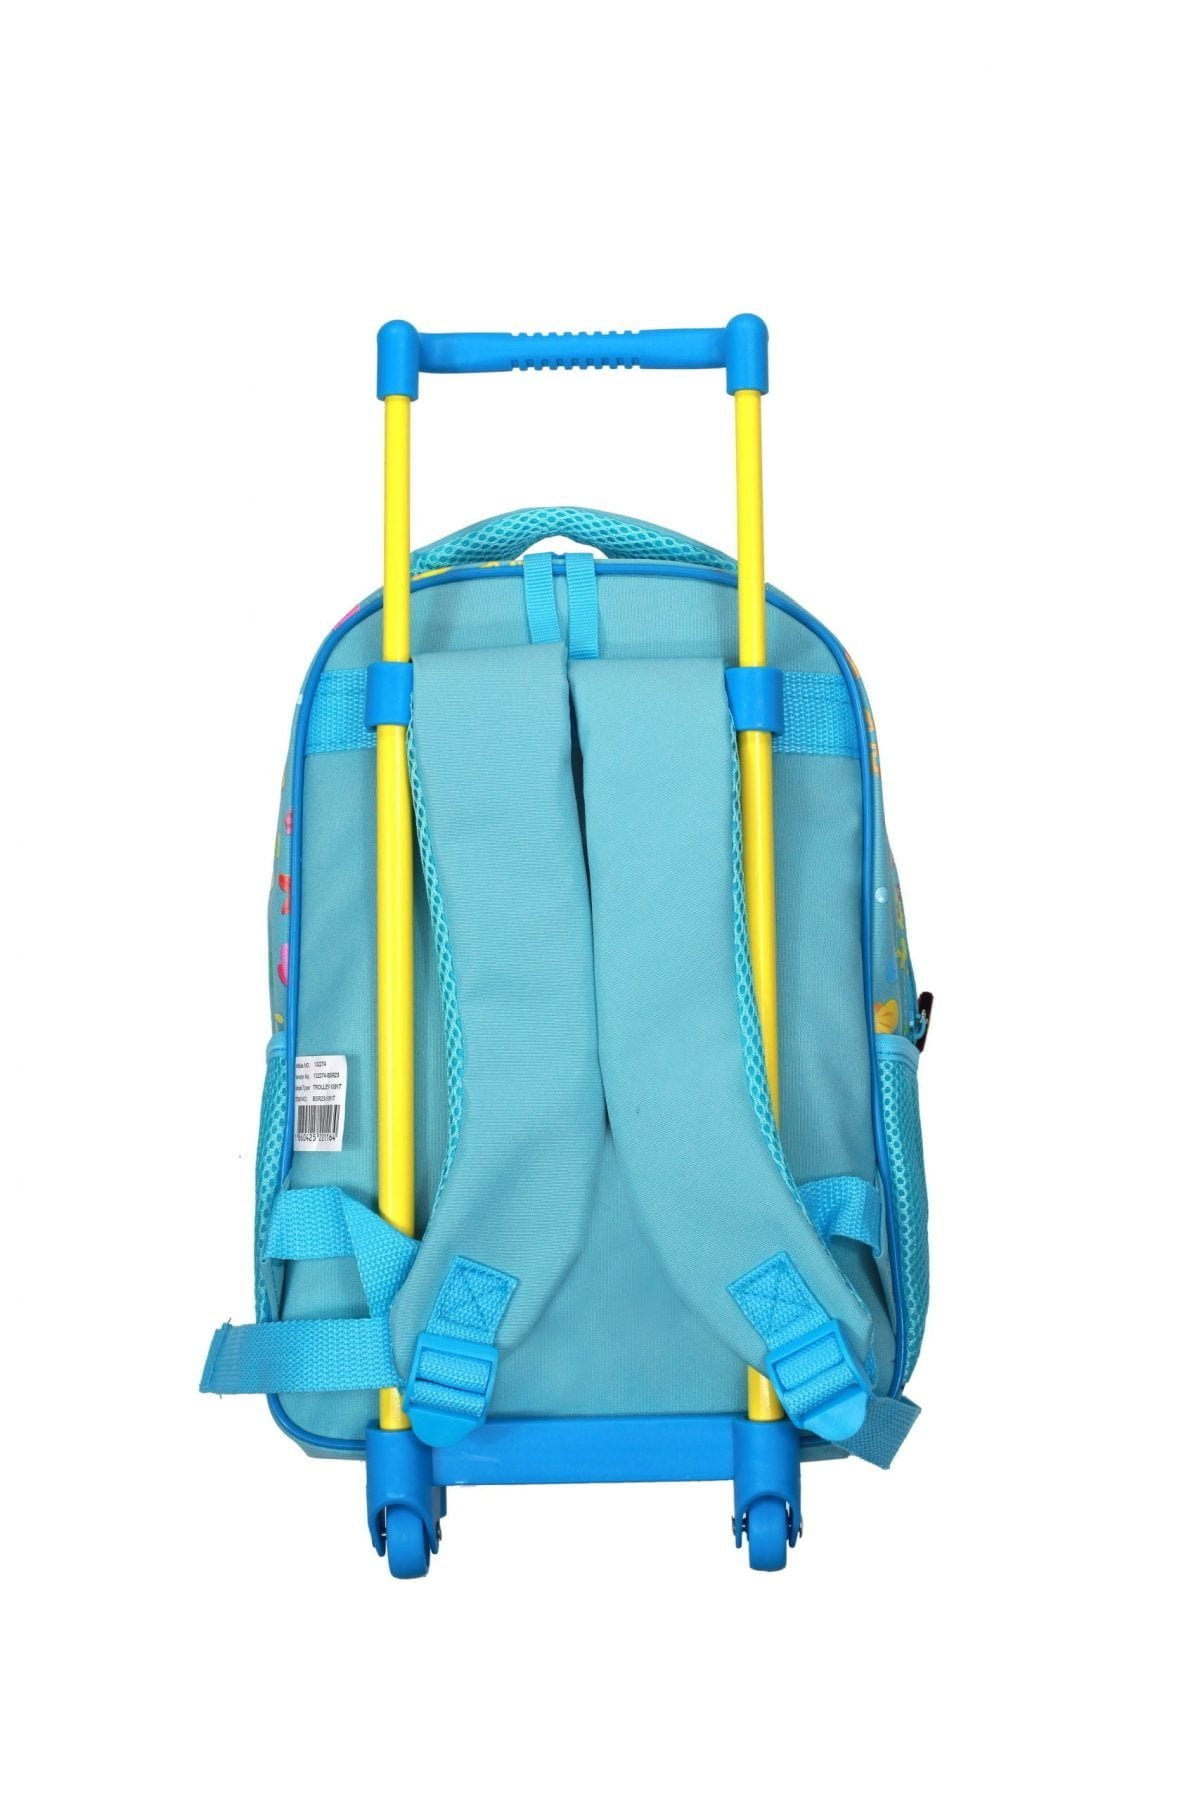 Bsr23 1091T 3 Scaled The Trolley Bag Is A Reliable Companion For Your Journey. The Trolley Features Main Zip Compartment To Keep Your Child'S Belonging Or School Items. The Trolley Has Comfortable Handle On The Top. The Fine Quality Material And Printing Makes It Durable And Stylish Option. It Is Easy To Zip And Unzip With Smooth Zippers And Pullers. The Wheels On The Bottom Make It Easy To Drag. Wipe With A Clean And Dry Cloth. Baby Shark Trolley Bag 13&Quot; - 2 Main Compartments And 2 Side Pockets (Blue)